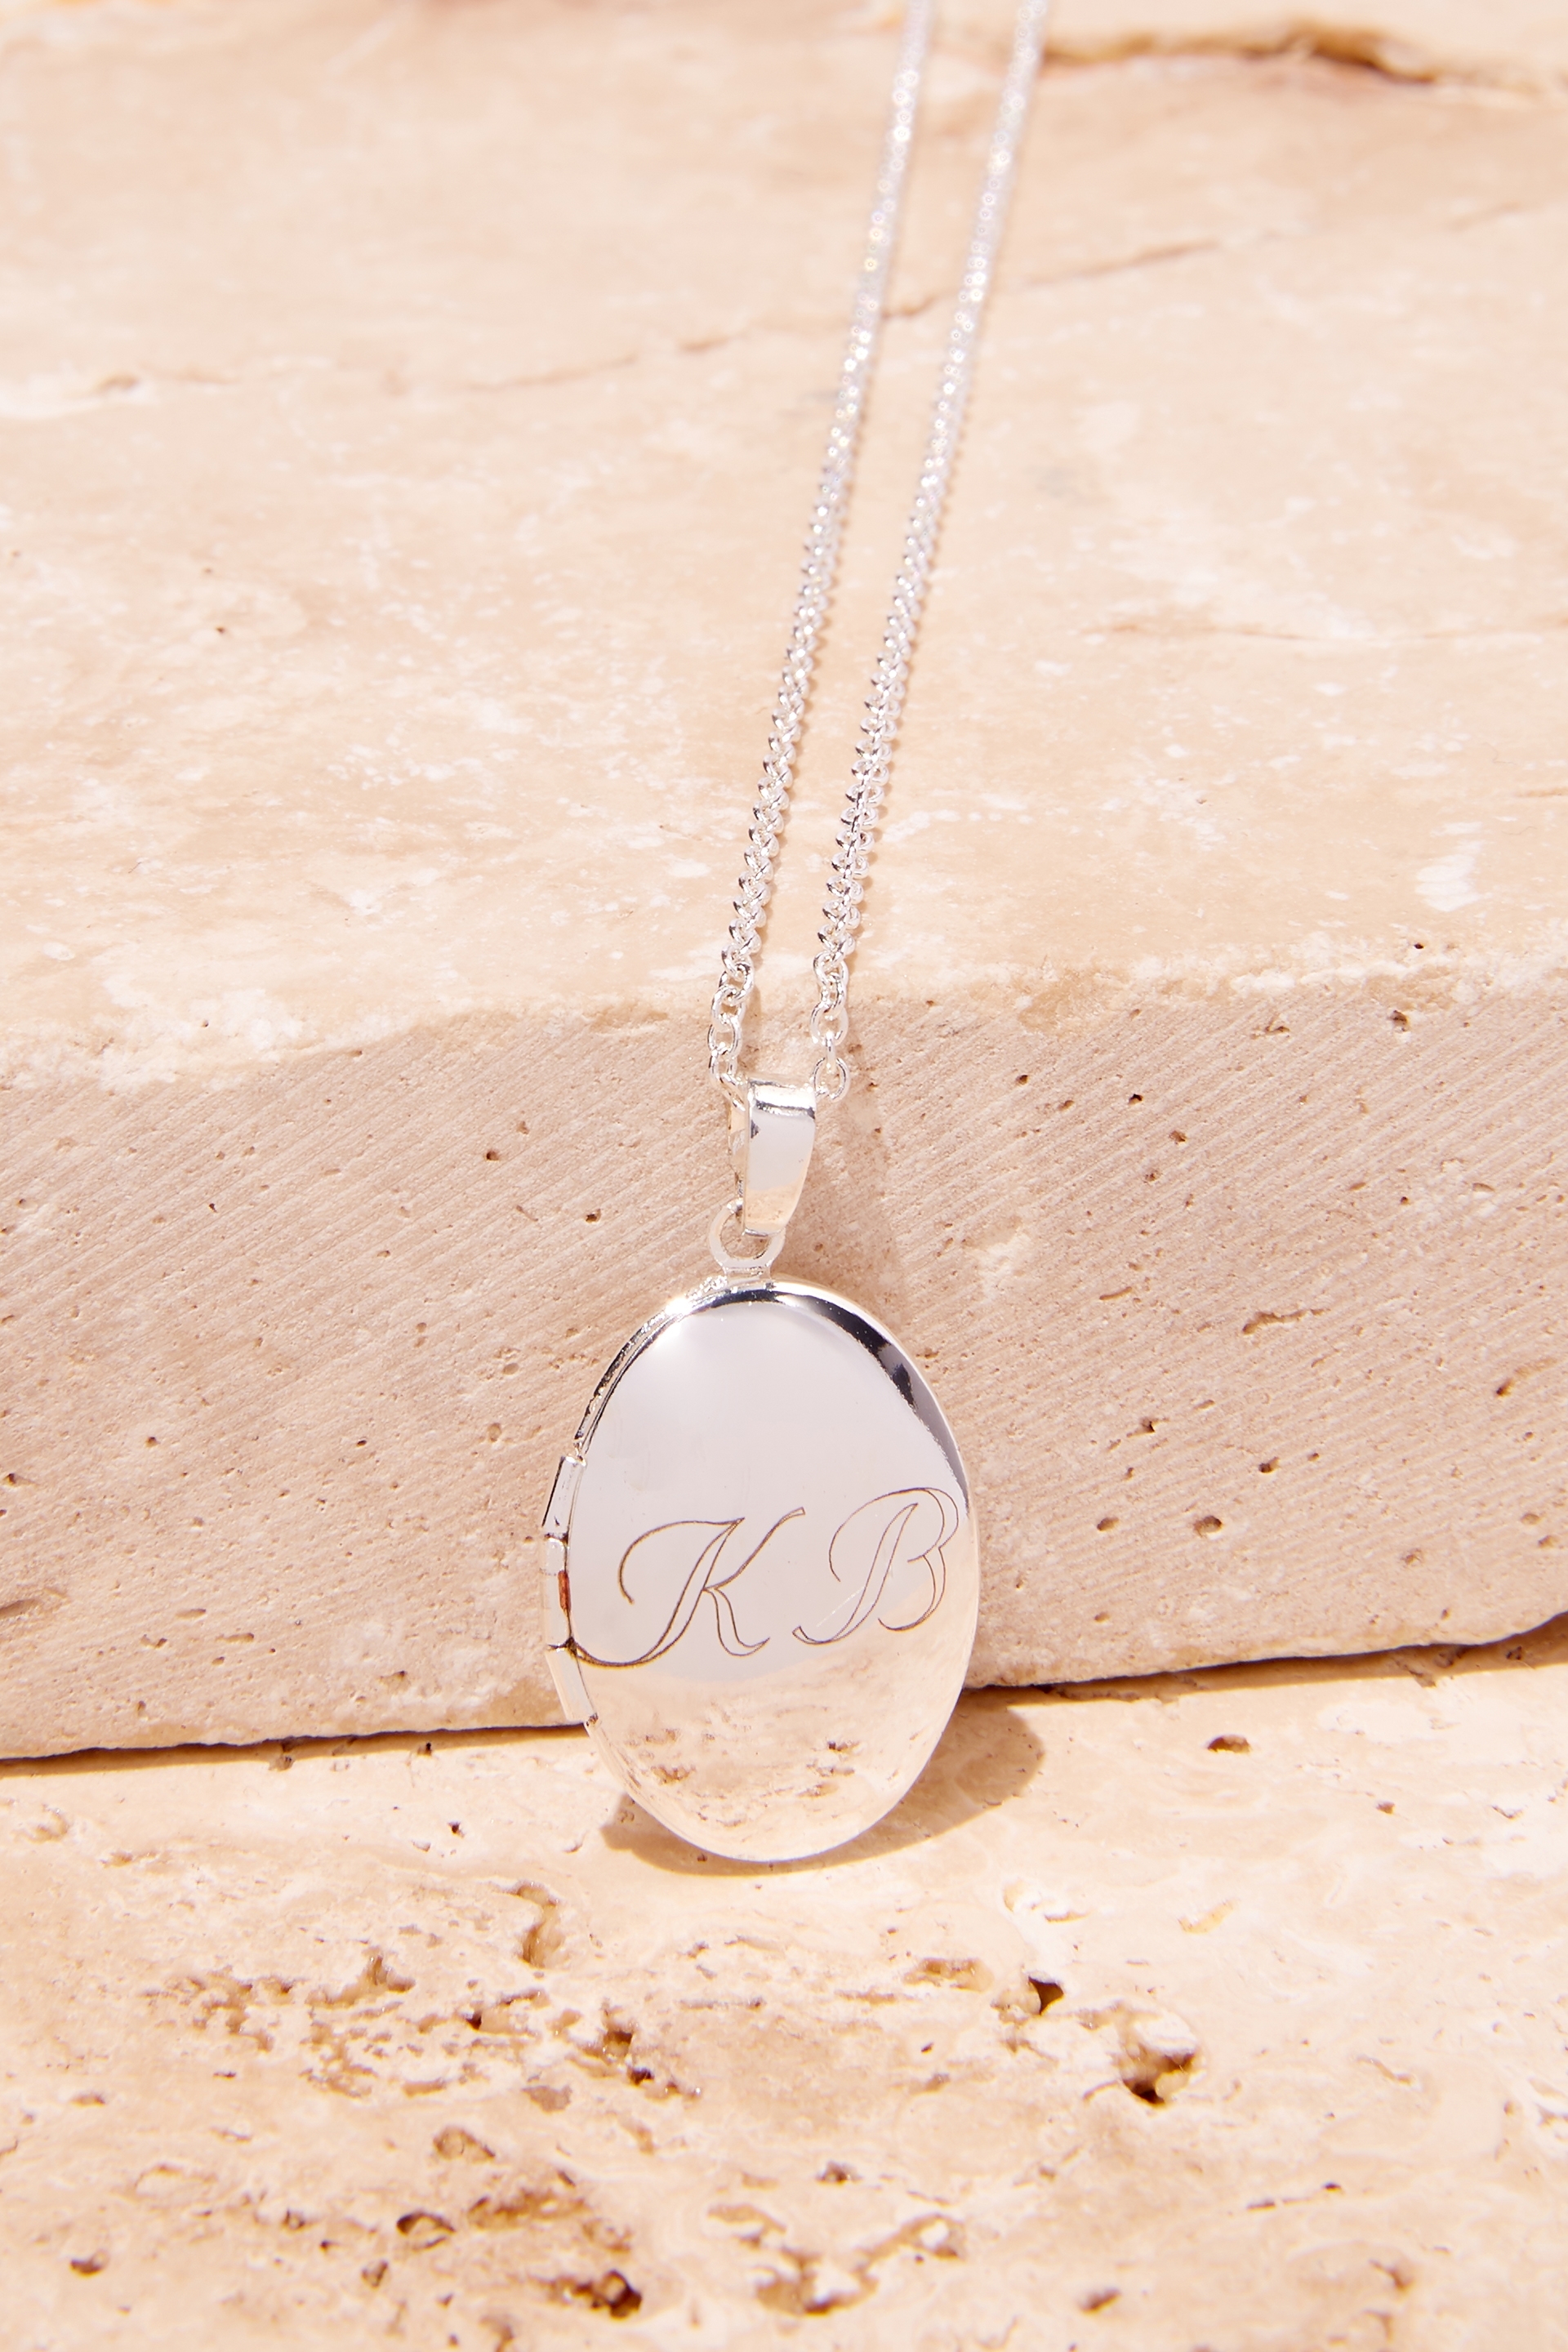 Rubi - Personalised Premium Pendant Necklace Silver Plate - Sterling silver plated locket